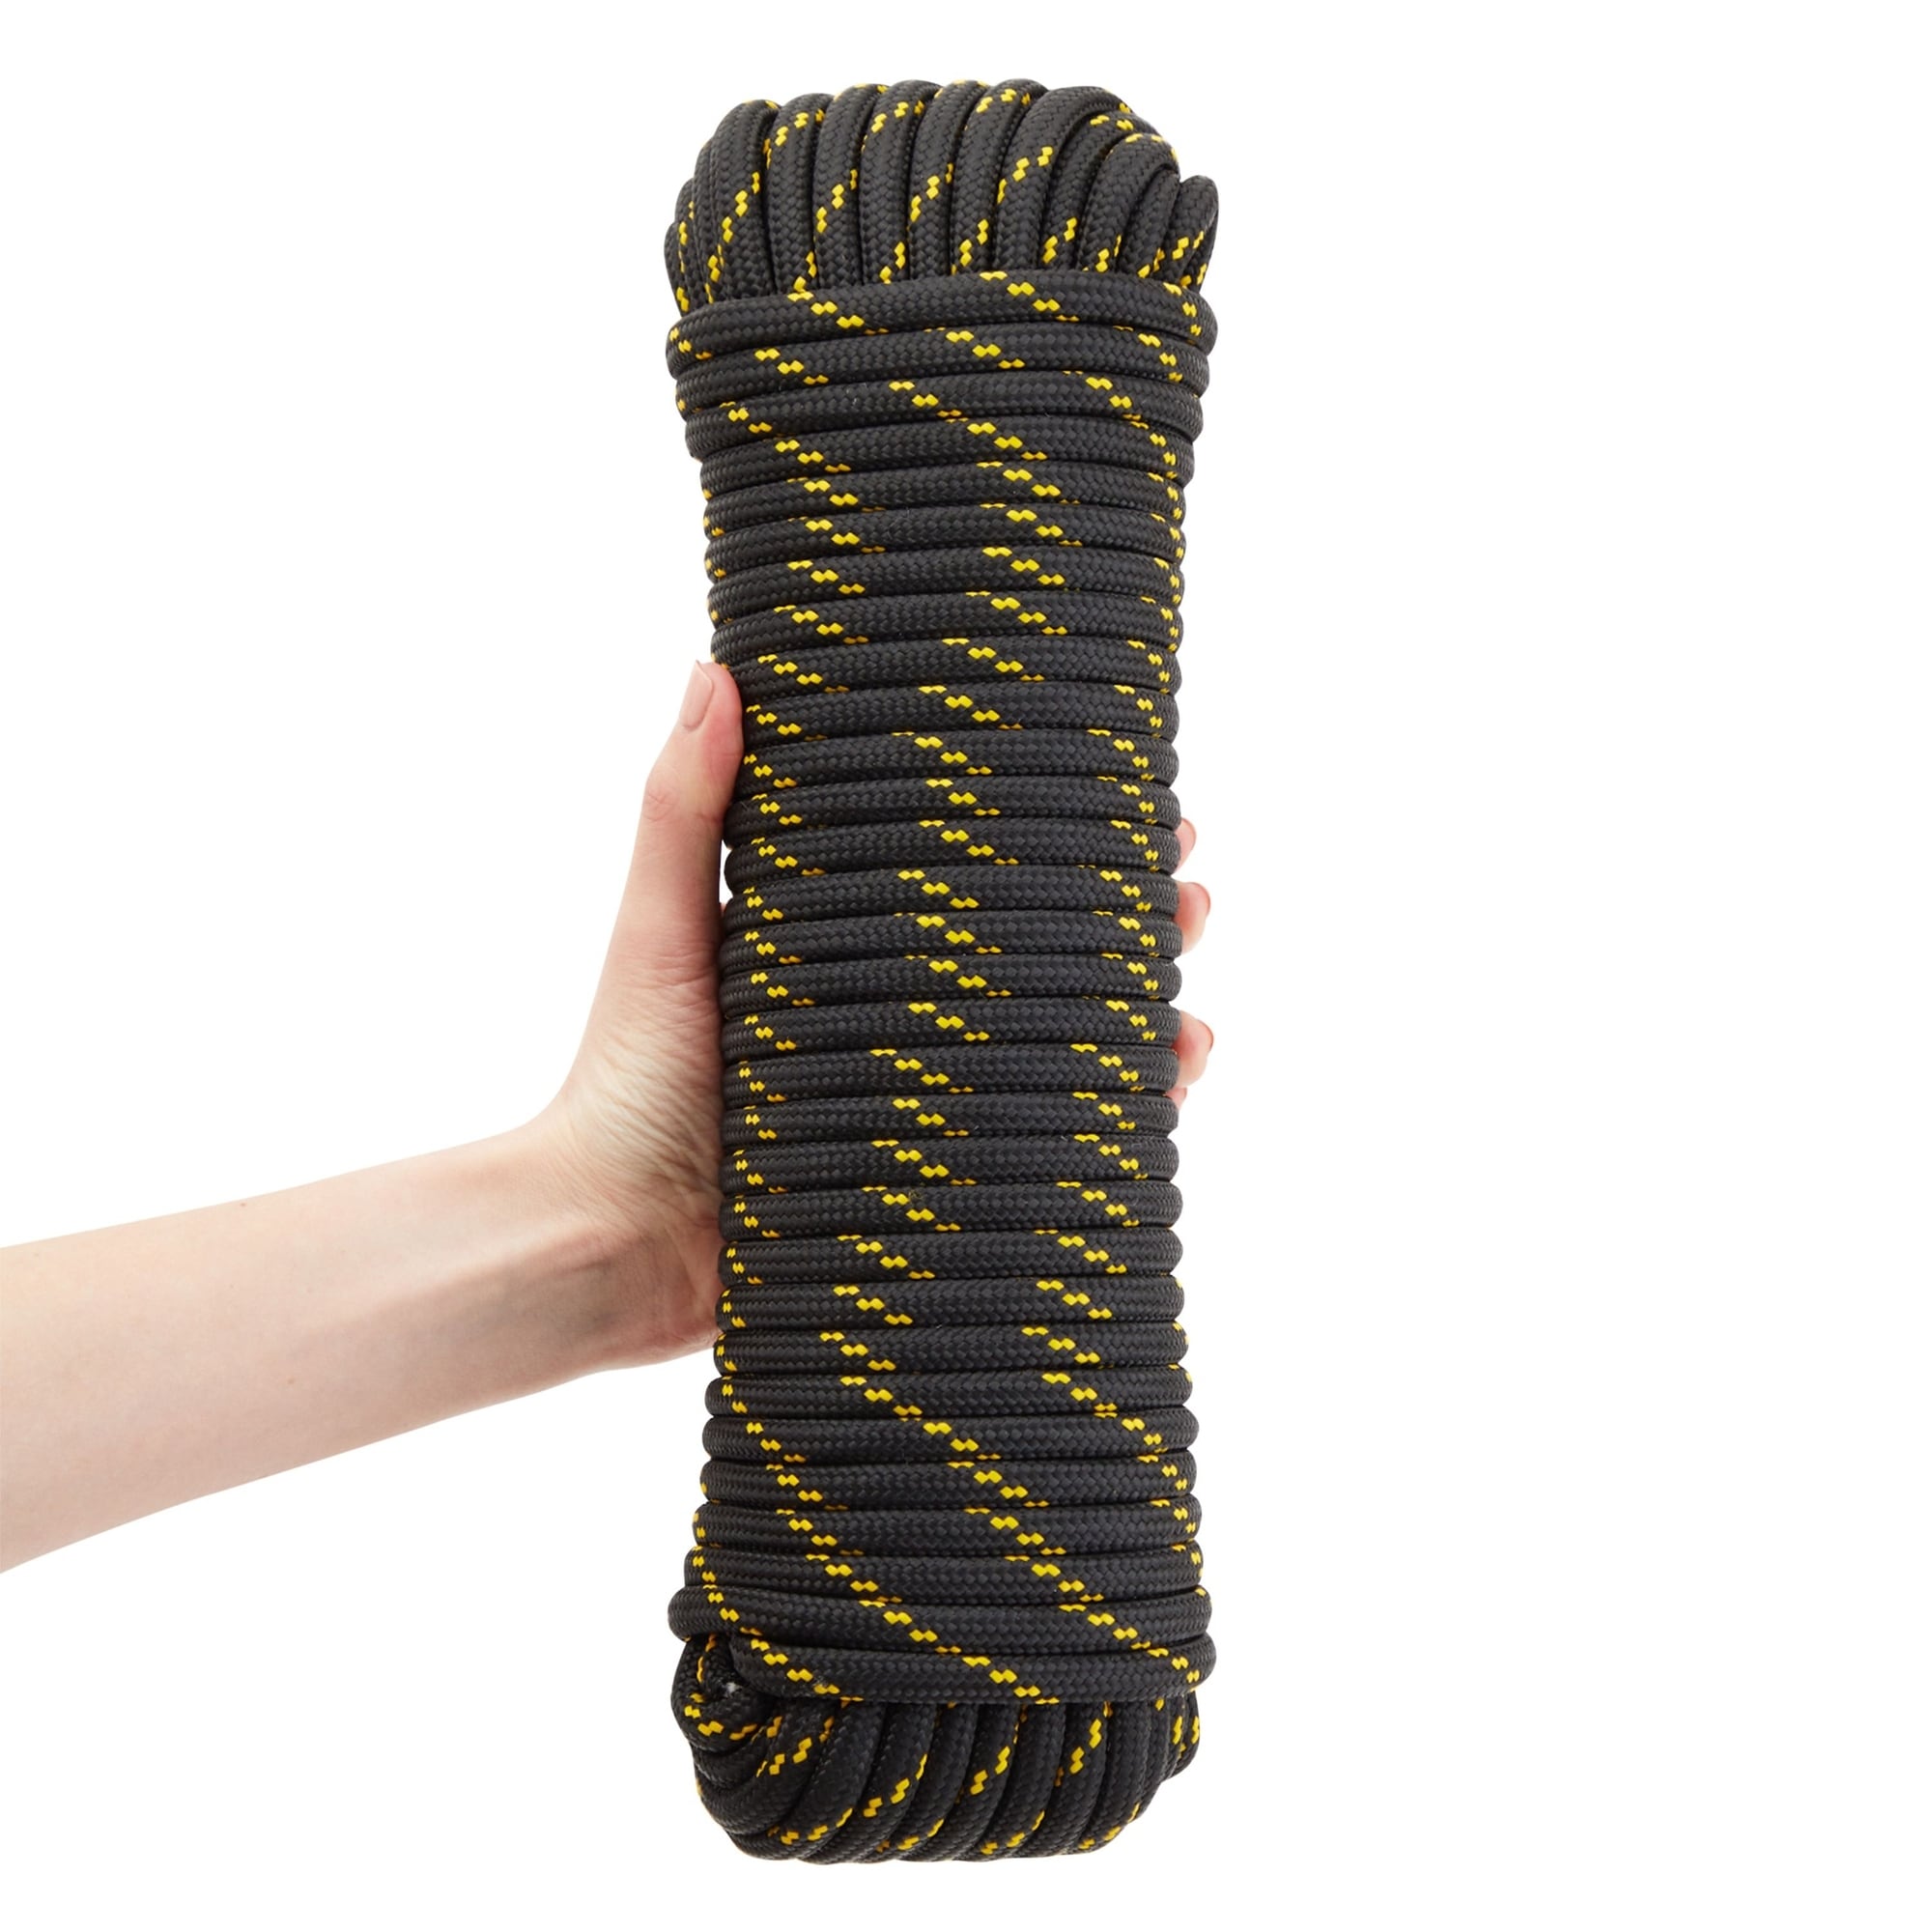 Built Industrial 3/8 inch x 100 ft Diamond Braided Rope for Knot Tying Practice, Camping, Boats, Trailer Tie Down (Polyester)